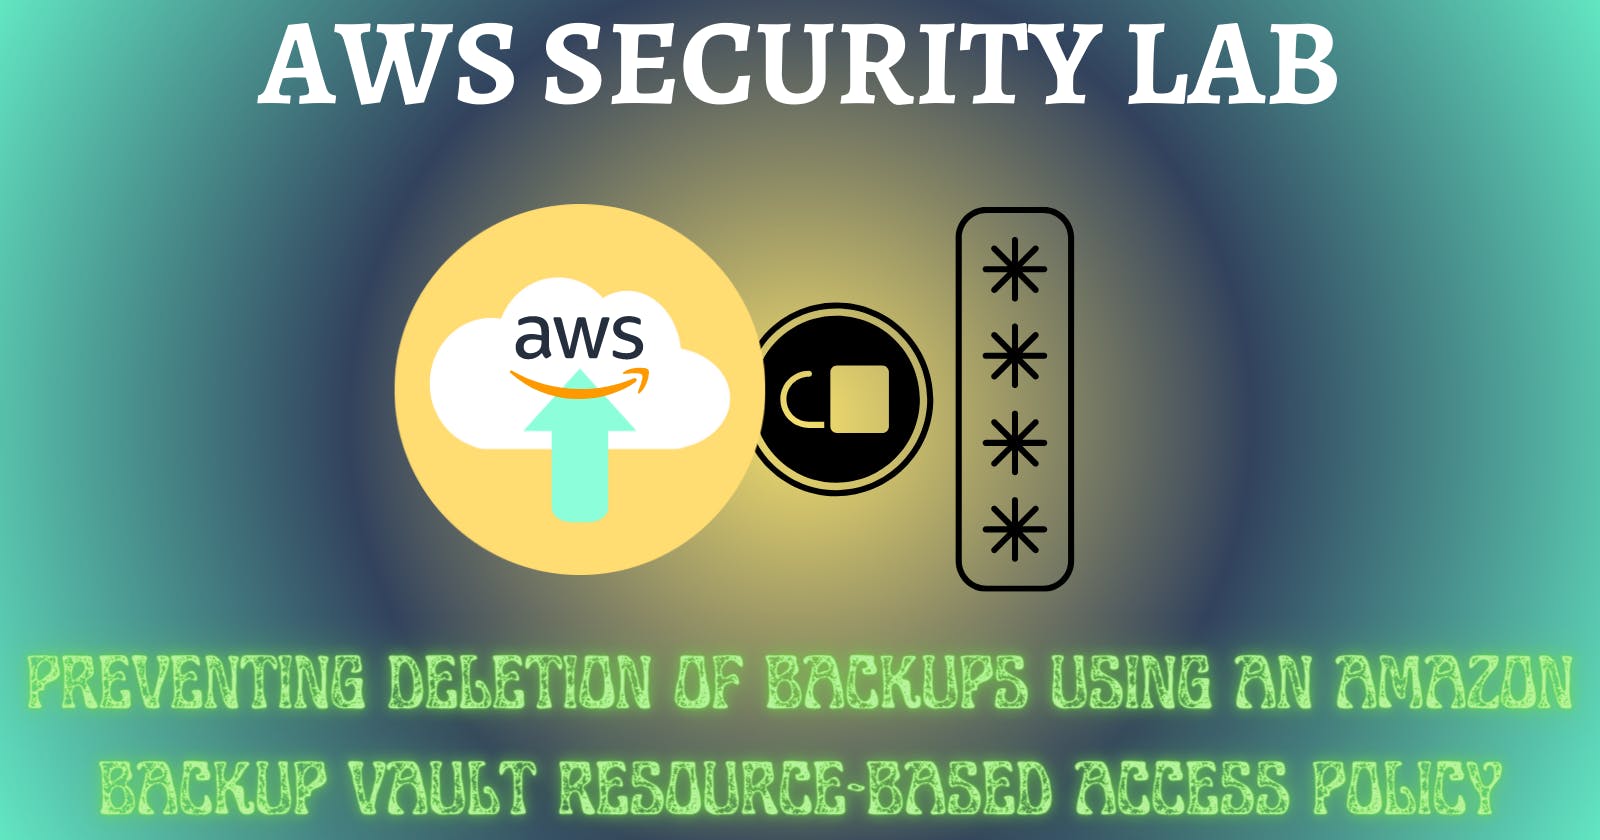 Preventing Deletion of Backups Using an Amazon Backup Vault Resource-based Access Policy